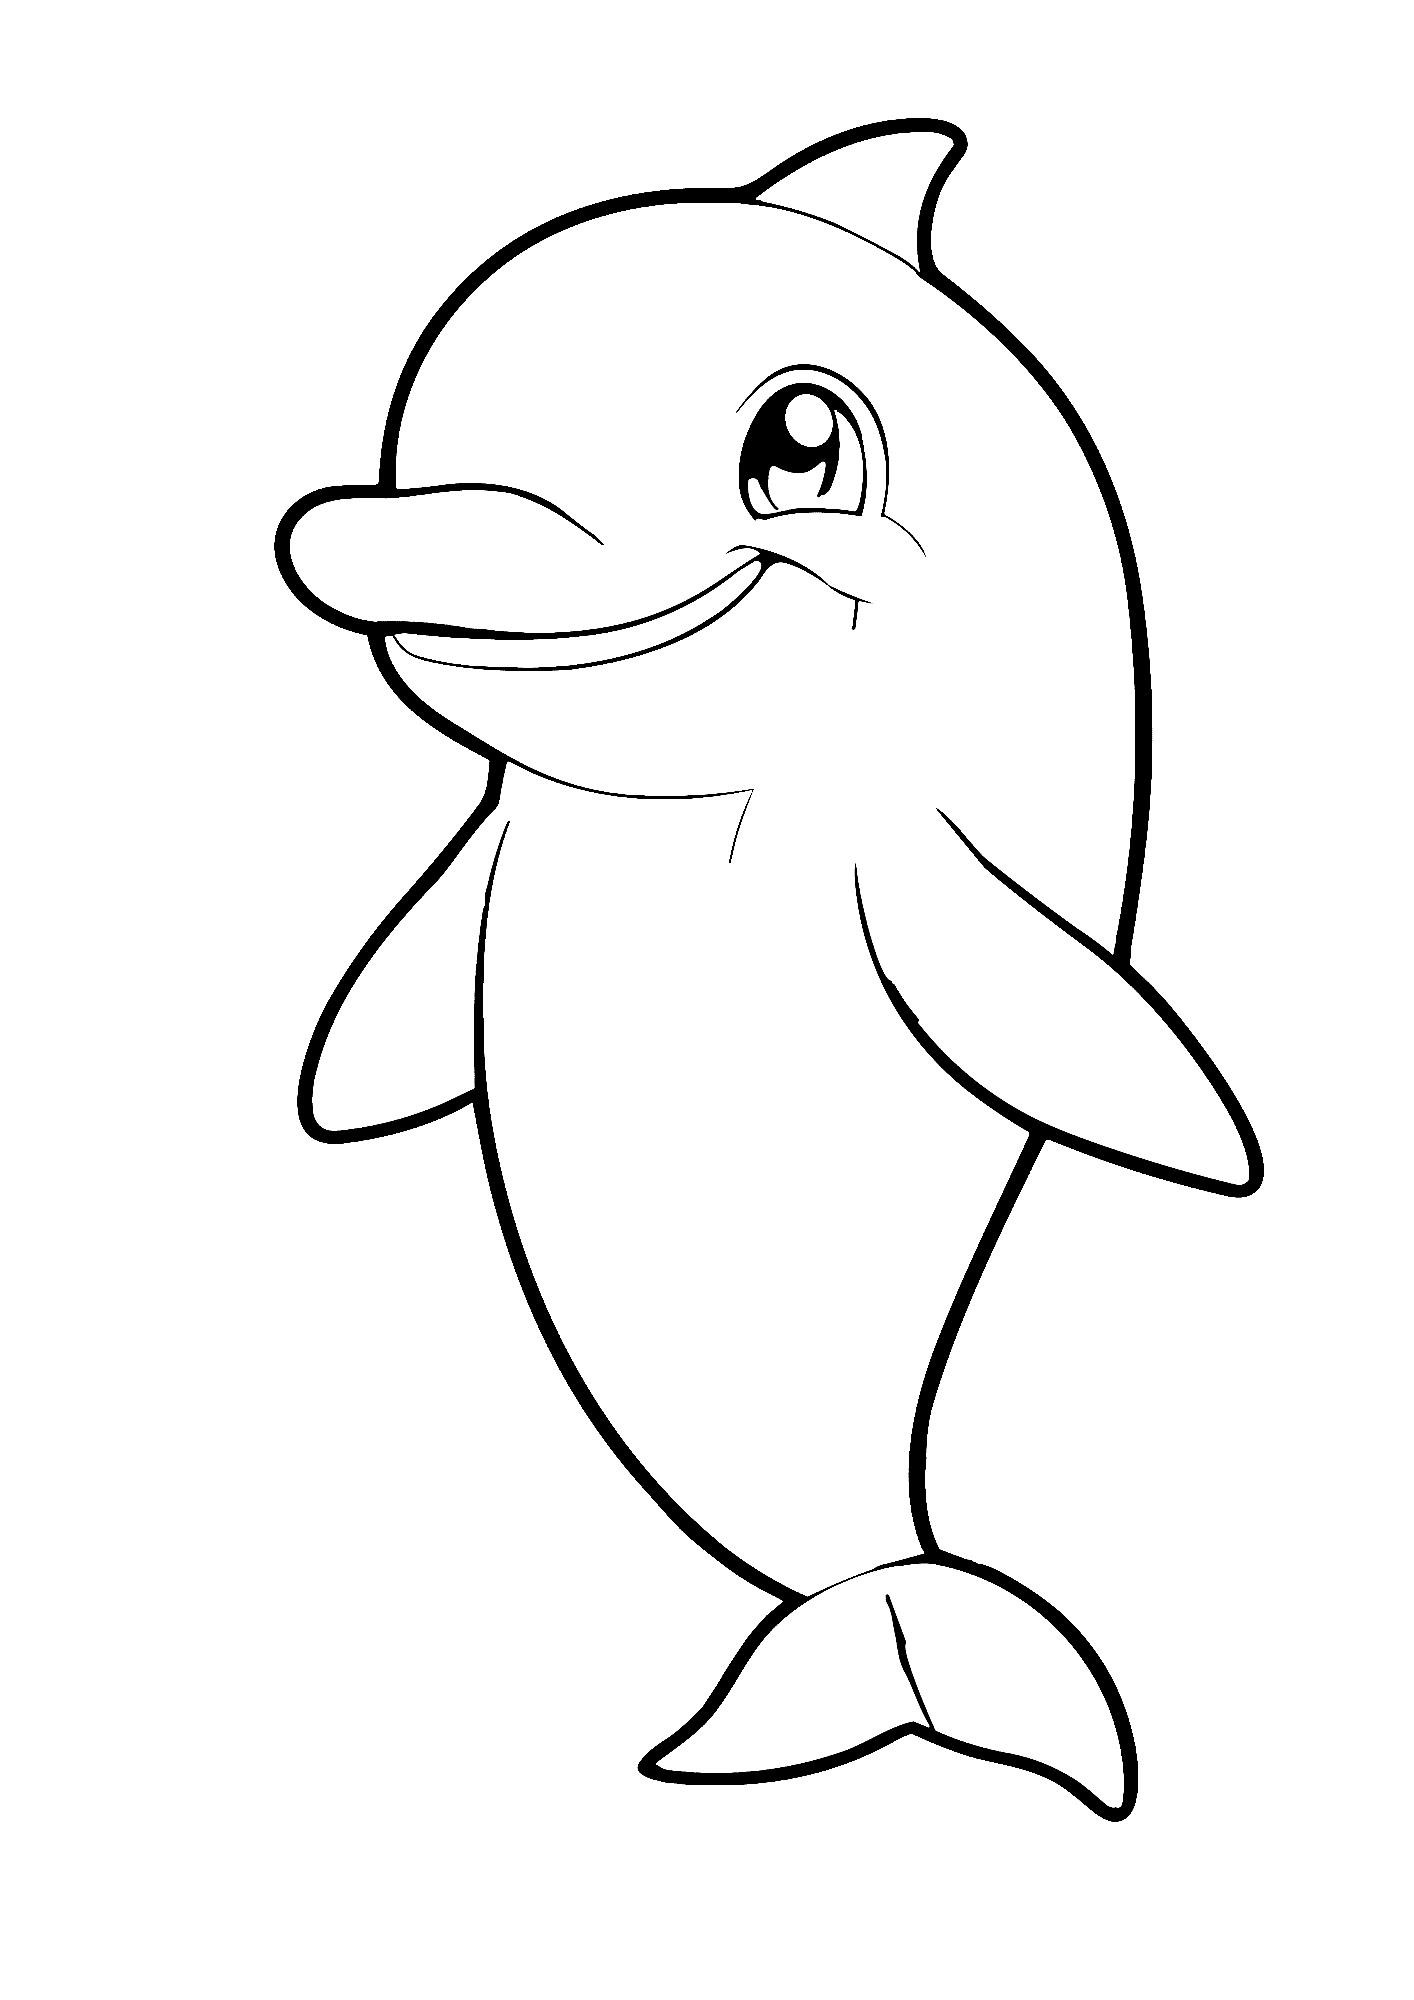 Dolphin Smile Coloring Page